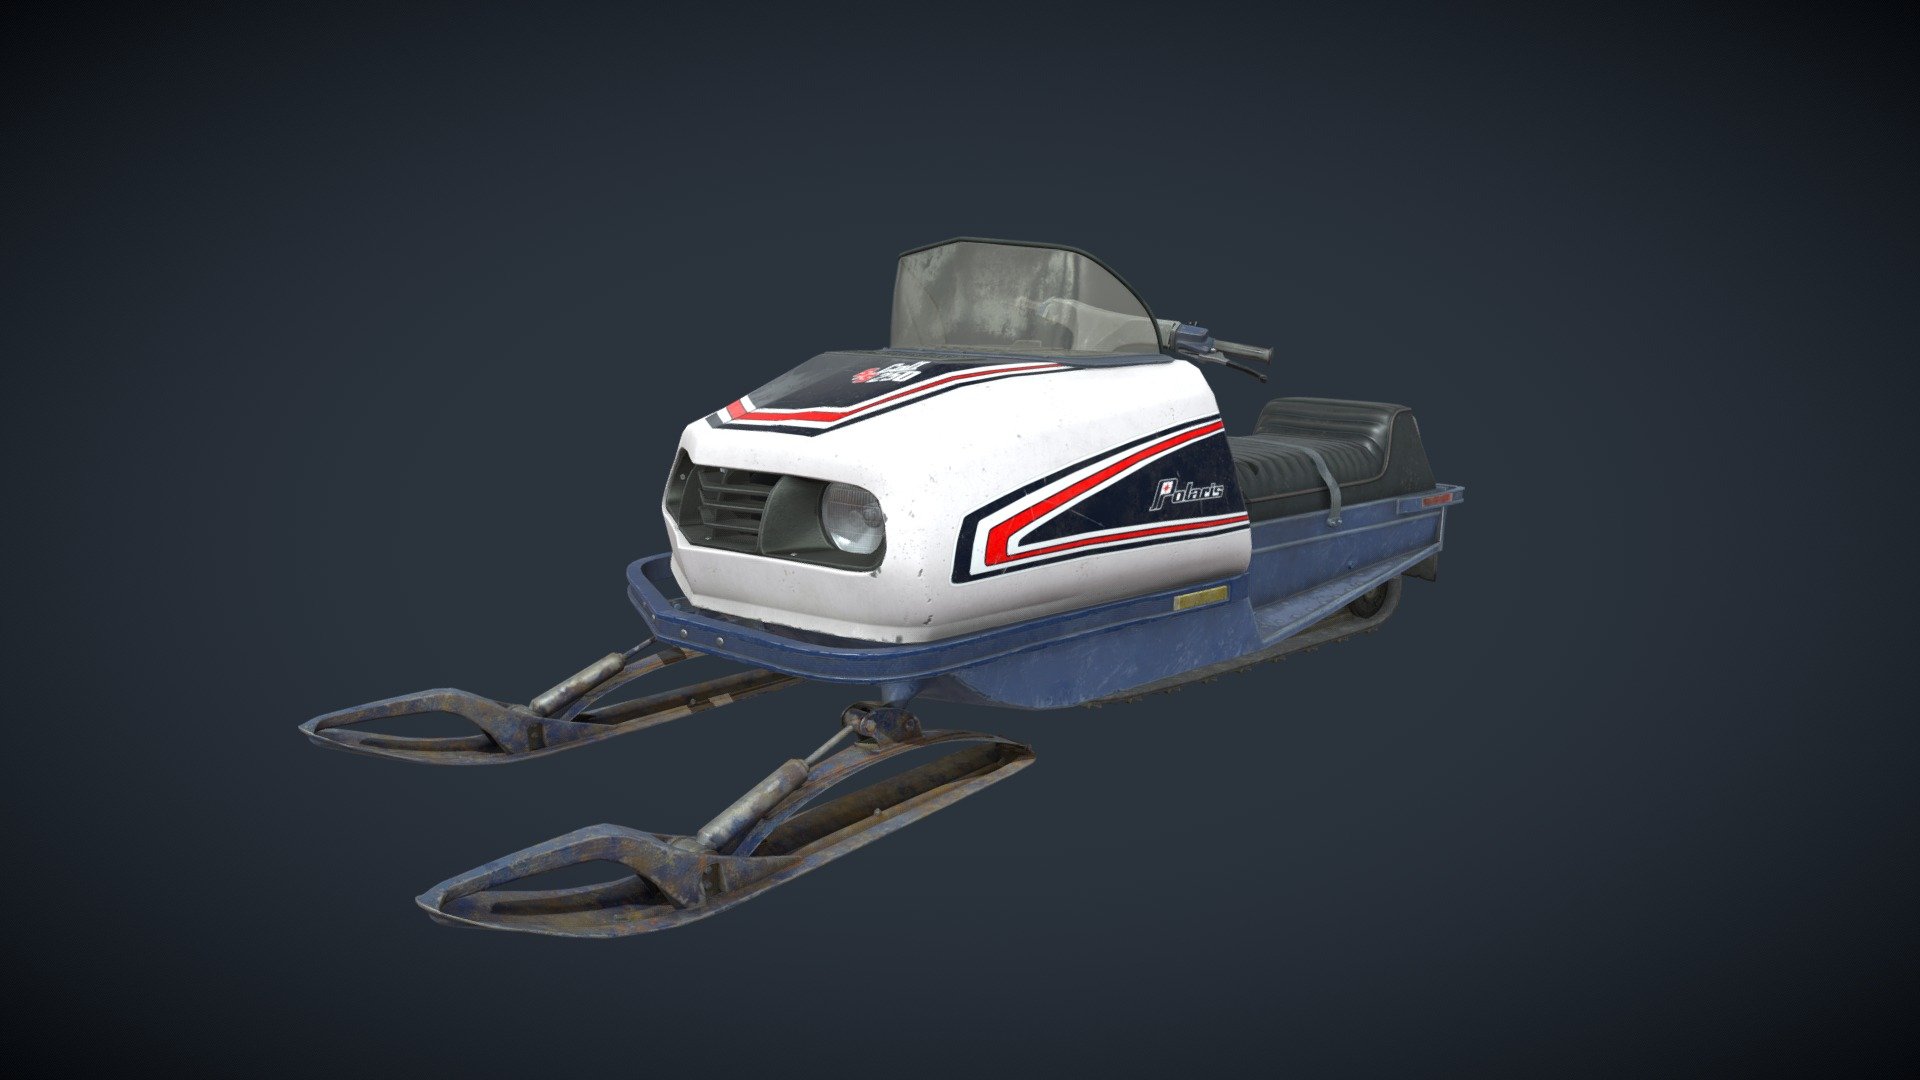 This snowmobile is a 1976 Polaris 250 Colt SS - Old Polaris Snowmobile - 3D model by Digital_Bacon 3d model